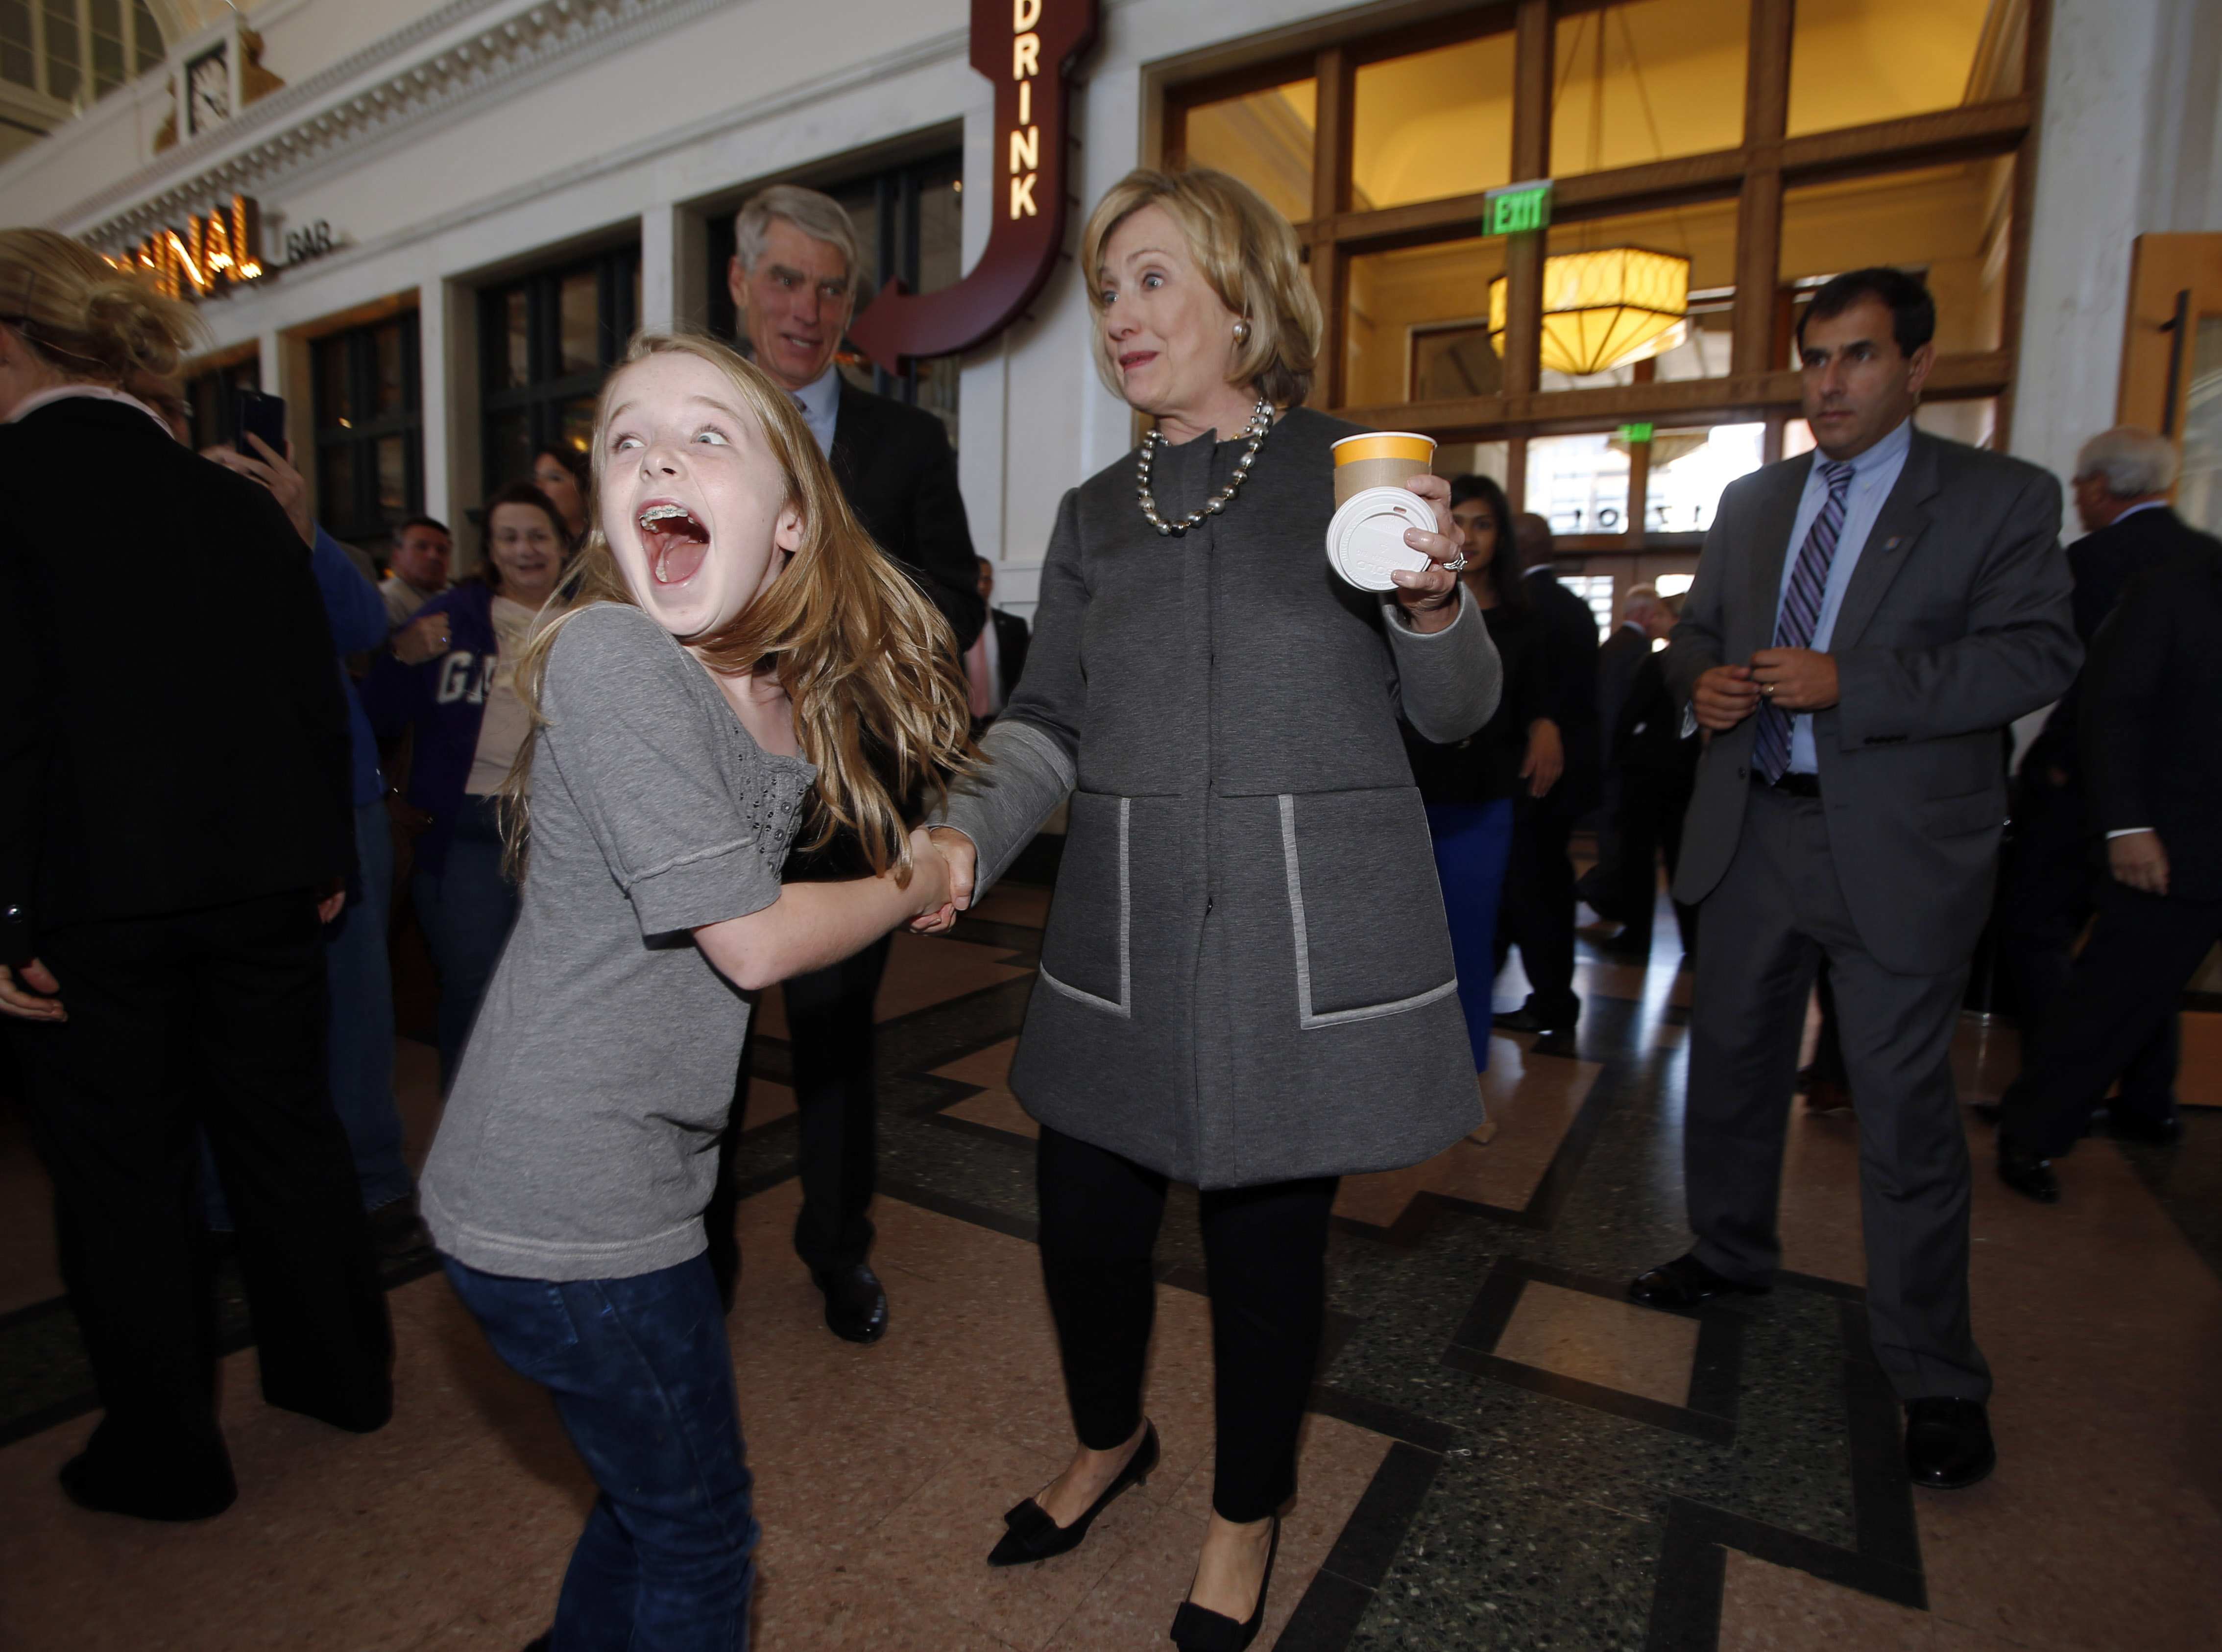 Ten-year-old Macy Friday, front left, reacts as she looks back at her family after meeting Hillary Clinton, front right, as she campaigns for U.S. Sen. Mark Udall, D-Colo., back, during a stop in Denver on Monday, Oct. 13, 2014. (David Zalubowski&mdash;AP)